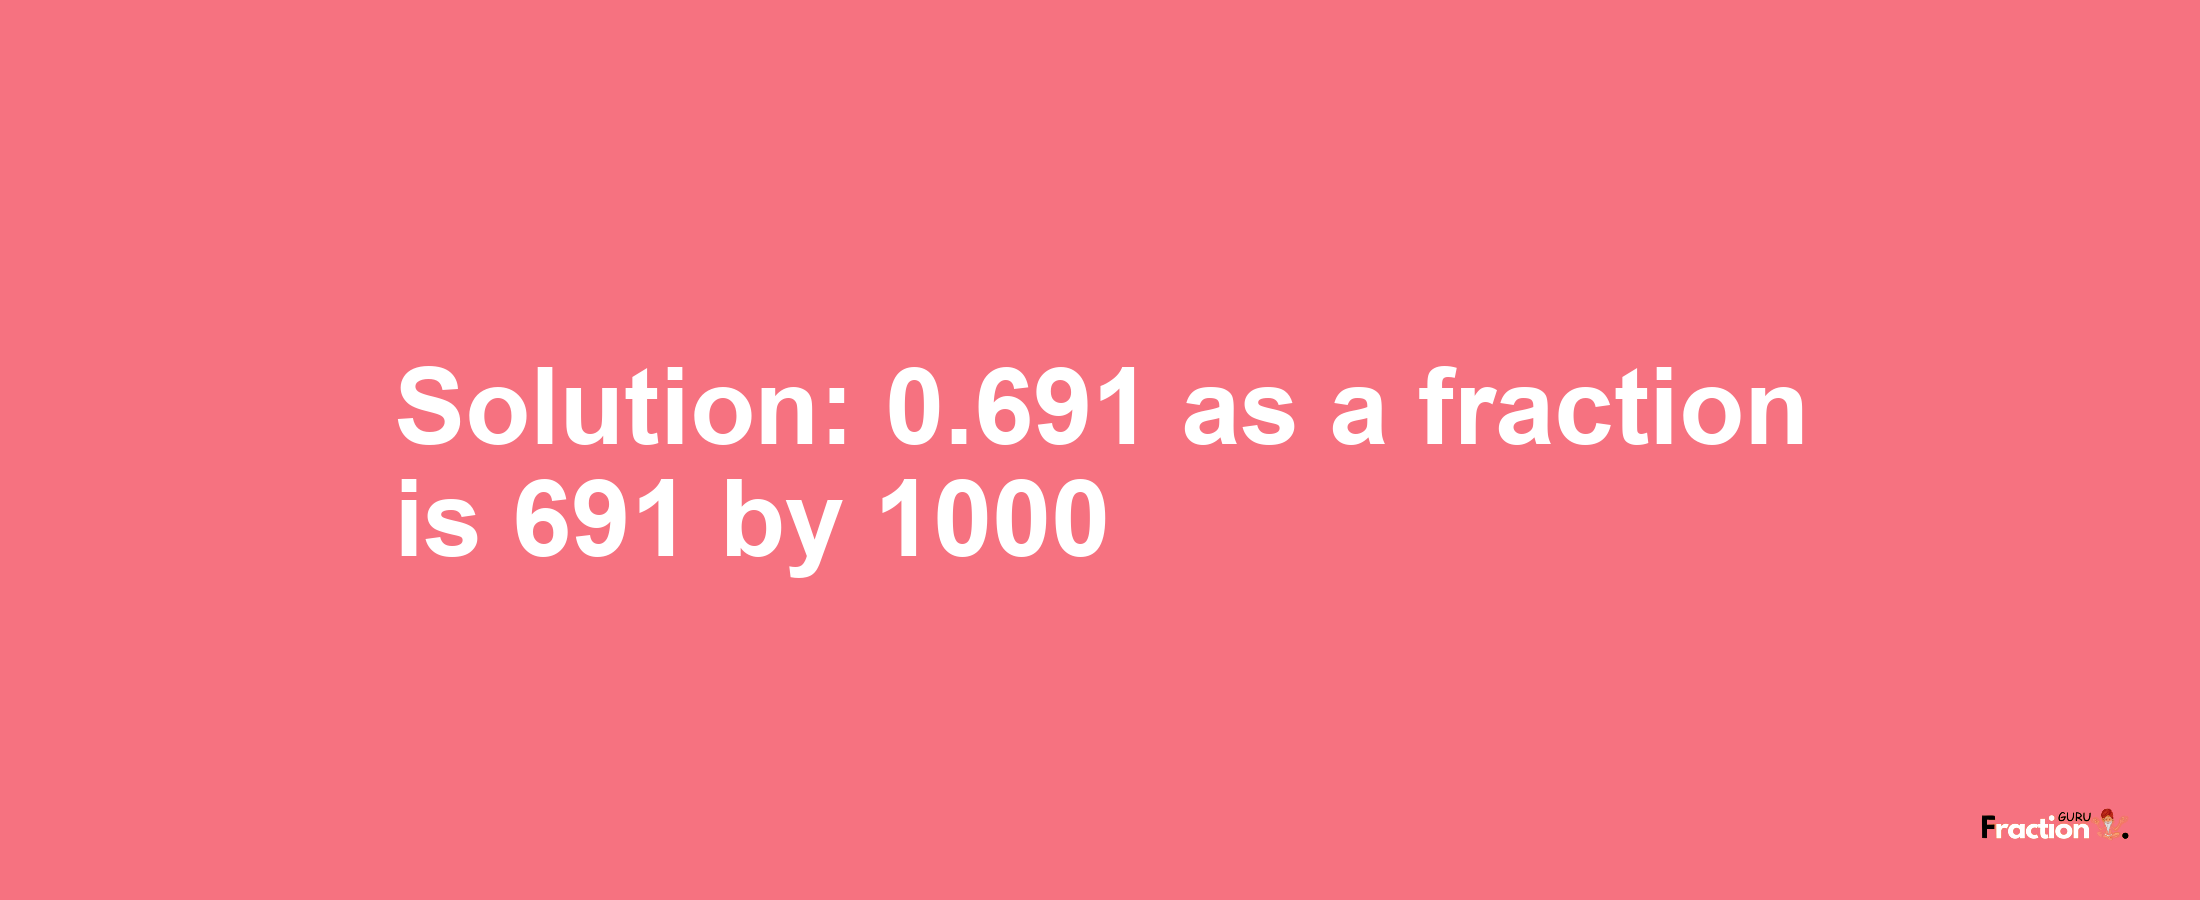 Solution:0.691 as a fraction is 691/1000